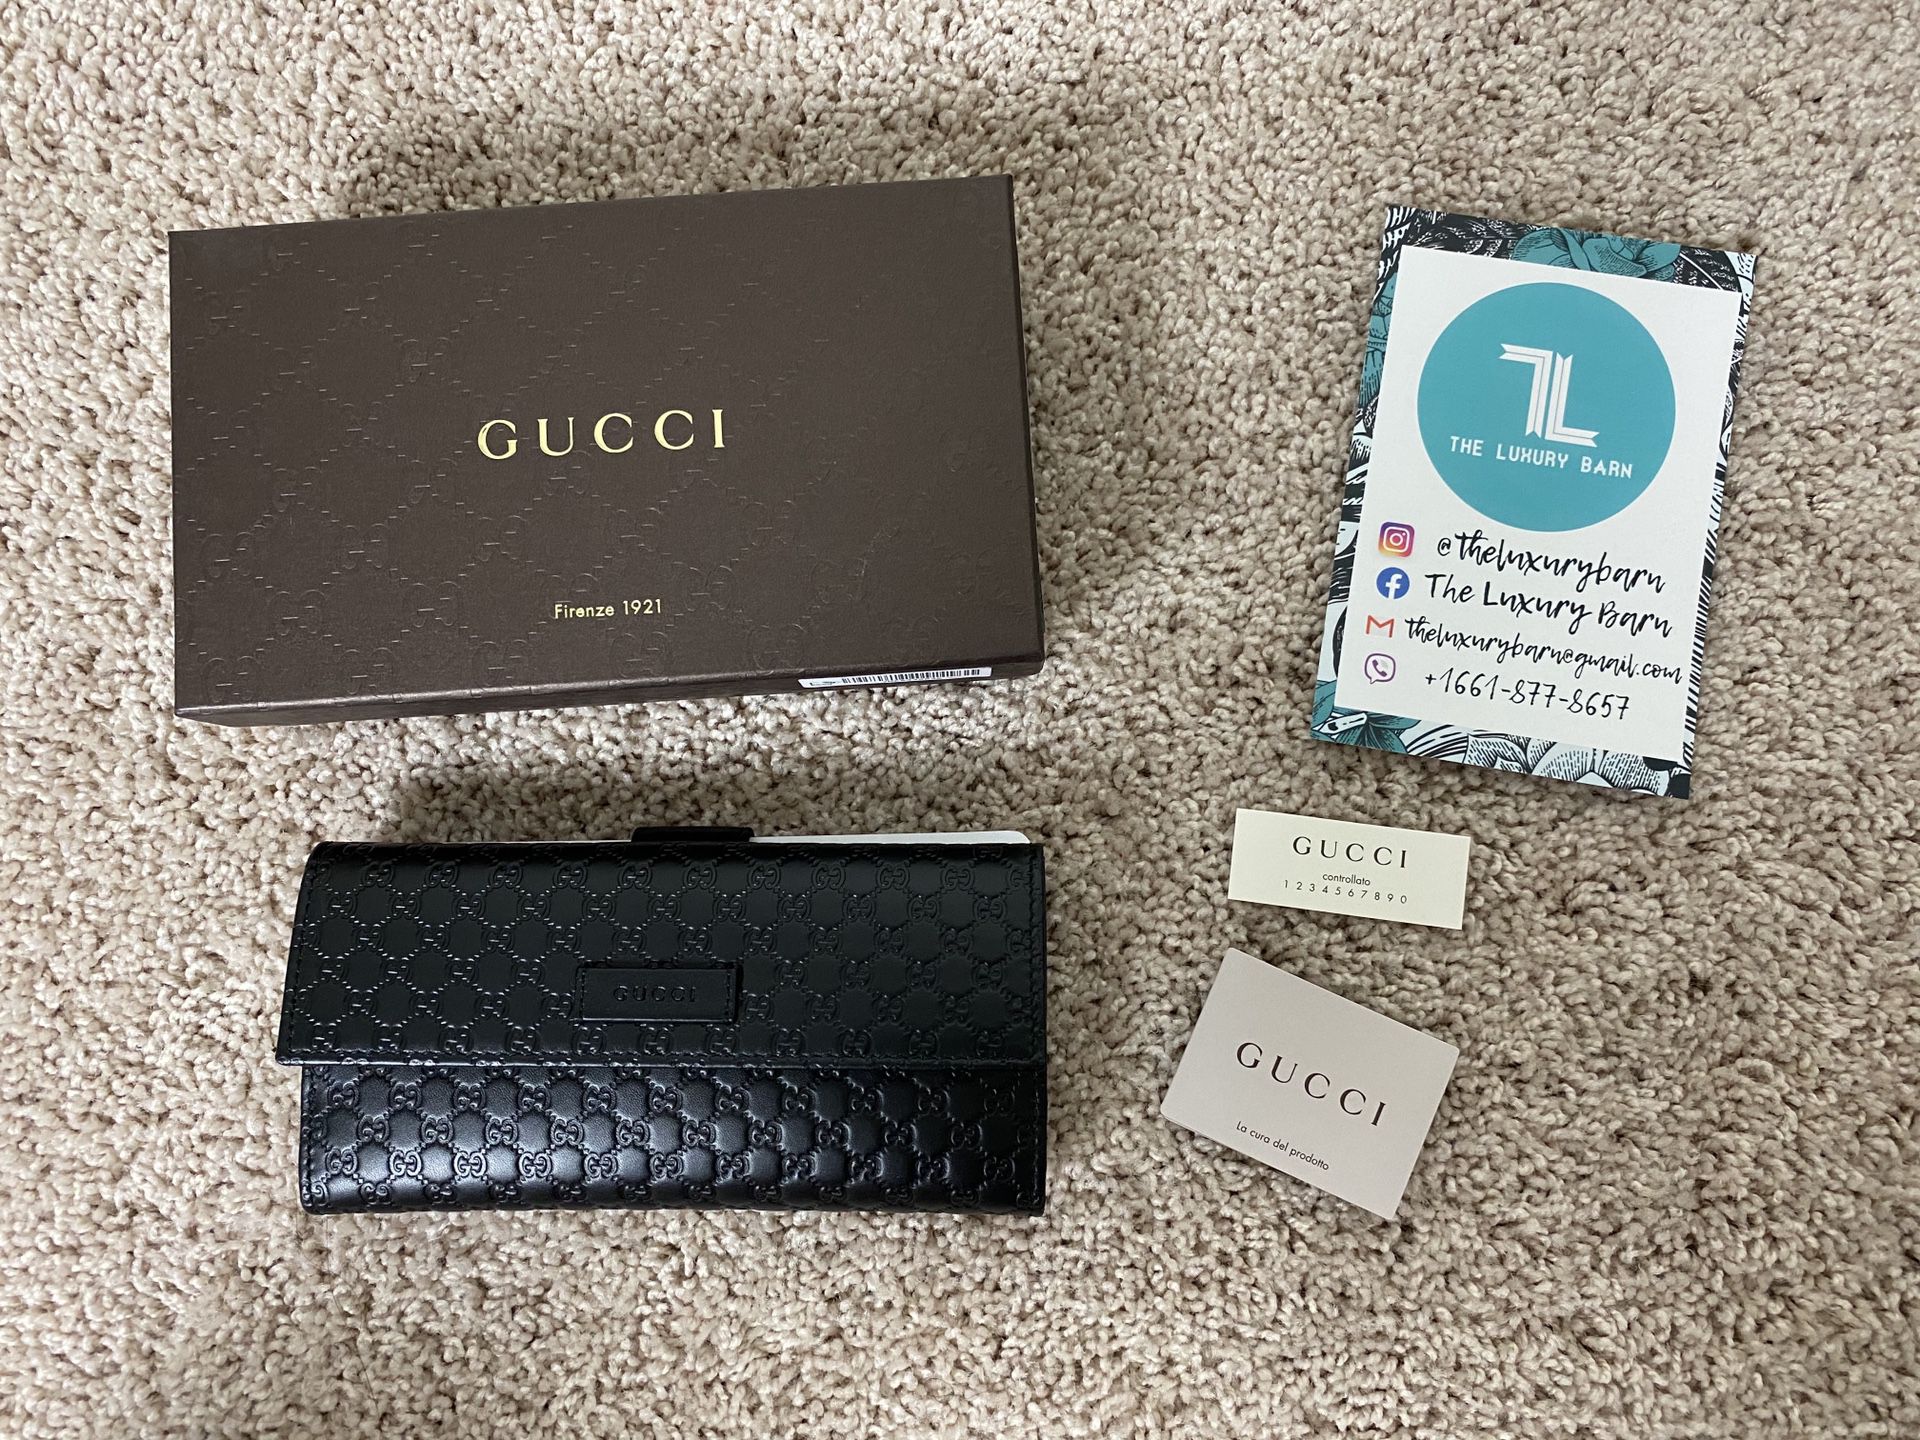 BNWT Authentic Gucci Microgussima Long Wallet Black